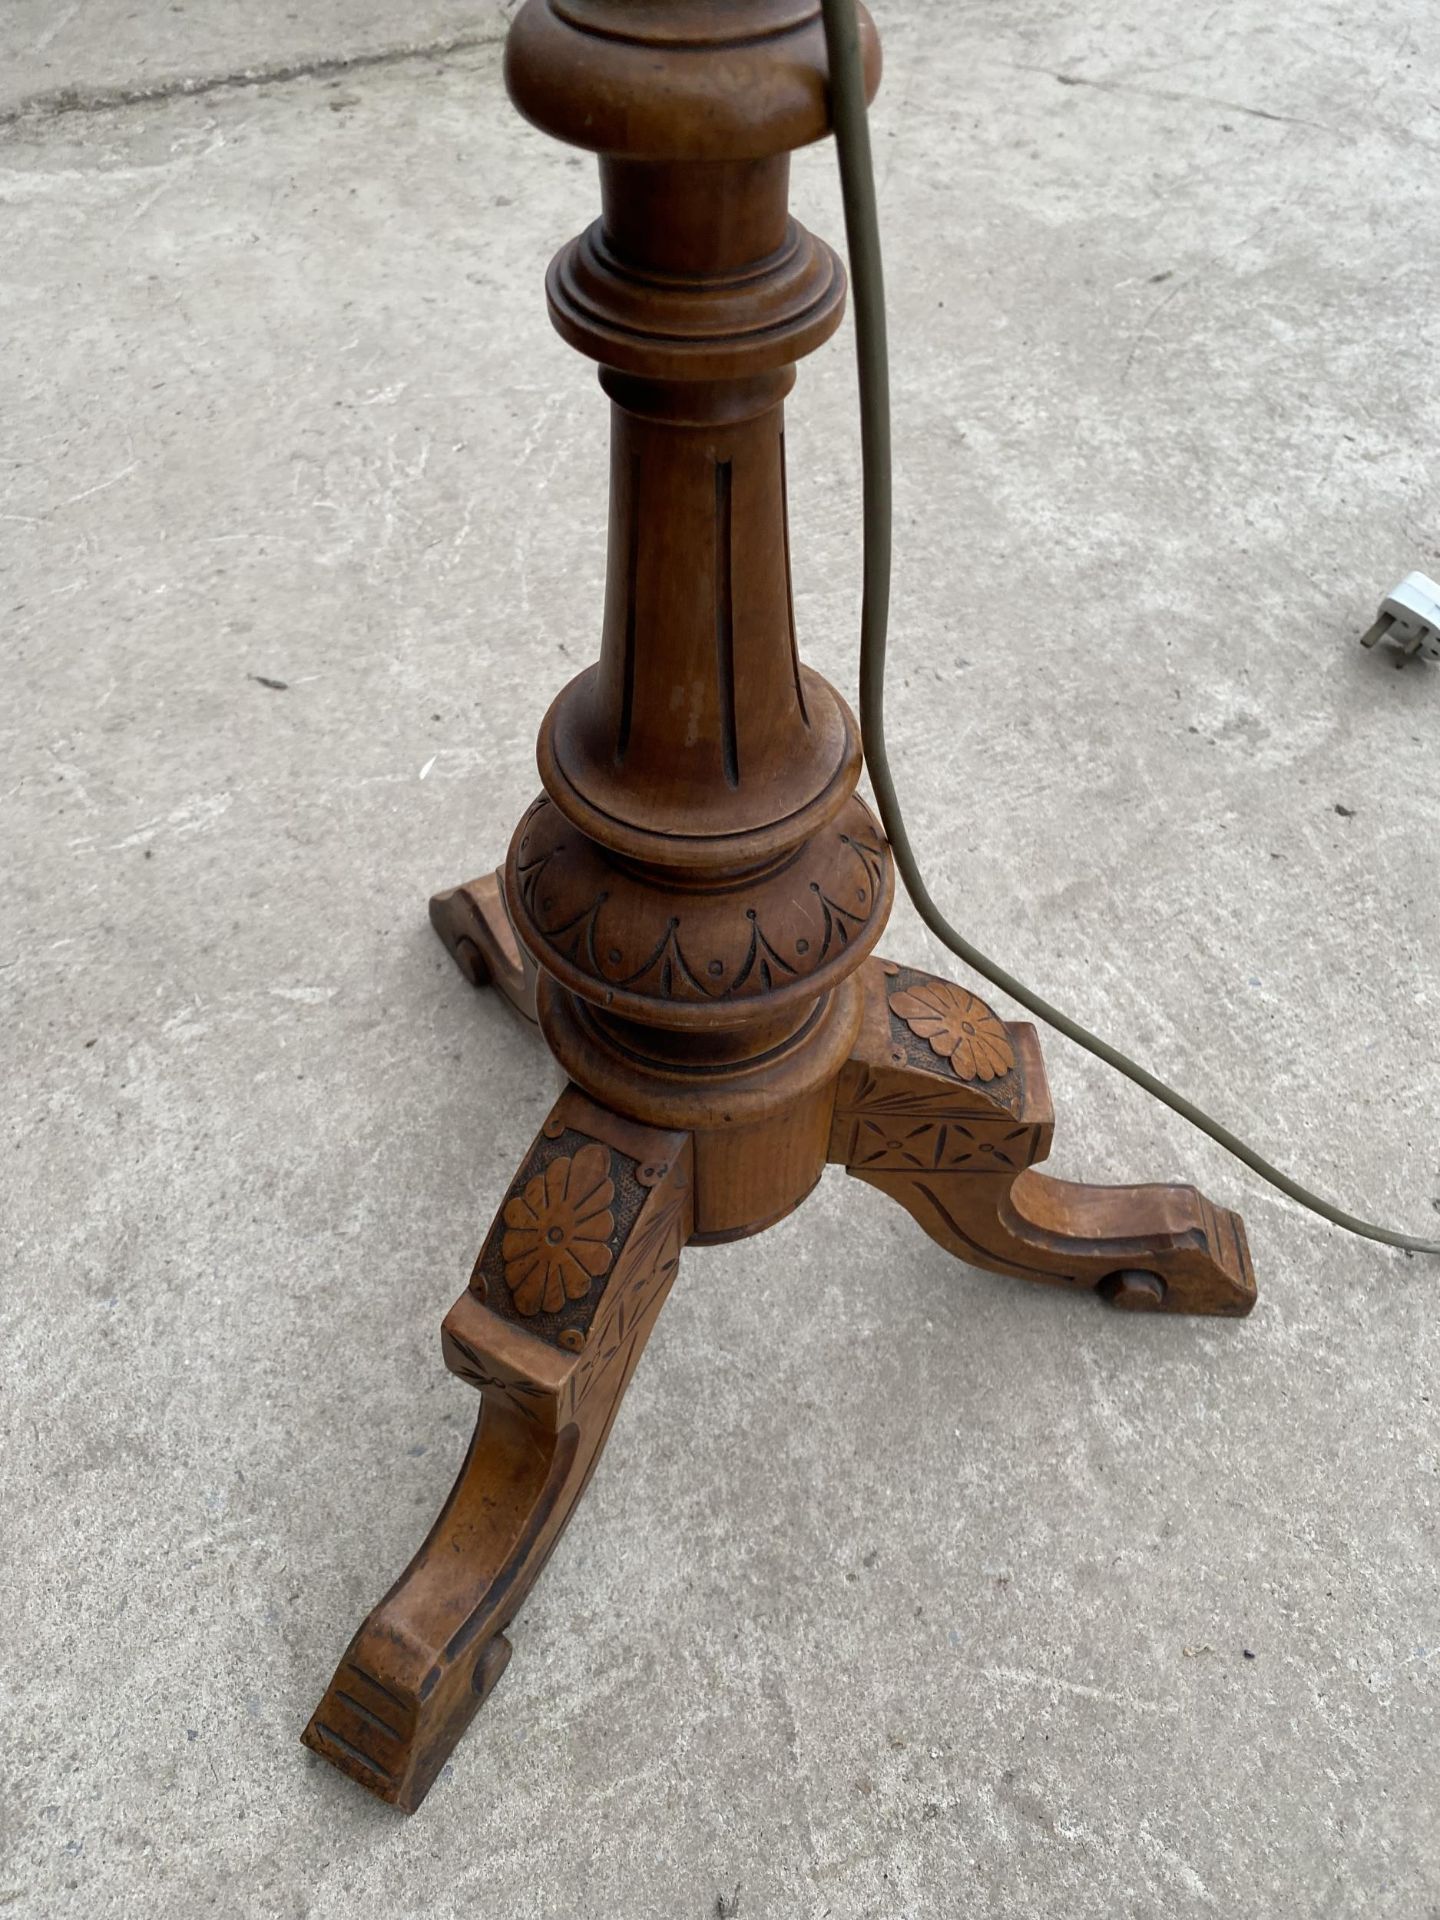 A VICTORIAN WALNUT SAMPLER STAND ON TRIPOD BASE COMPLETE WITH FLEX FOR LIGHT FITTING - Image 2 of 3